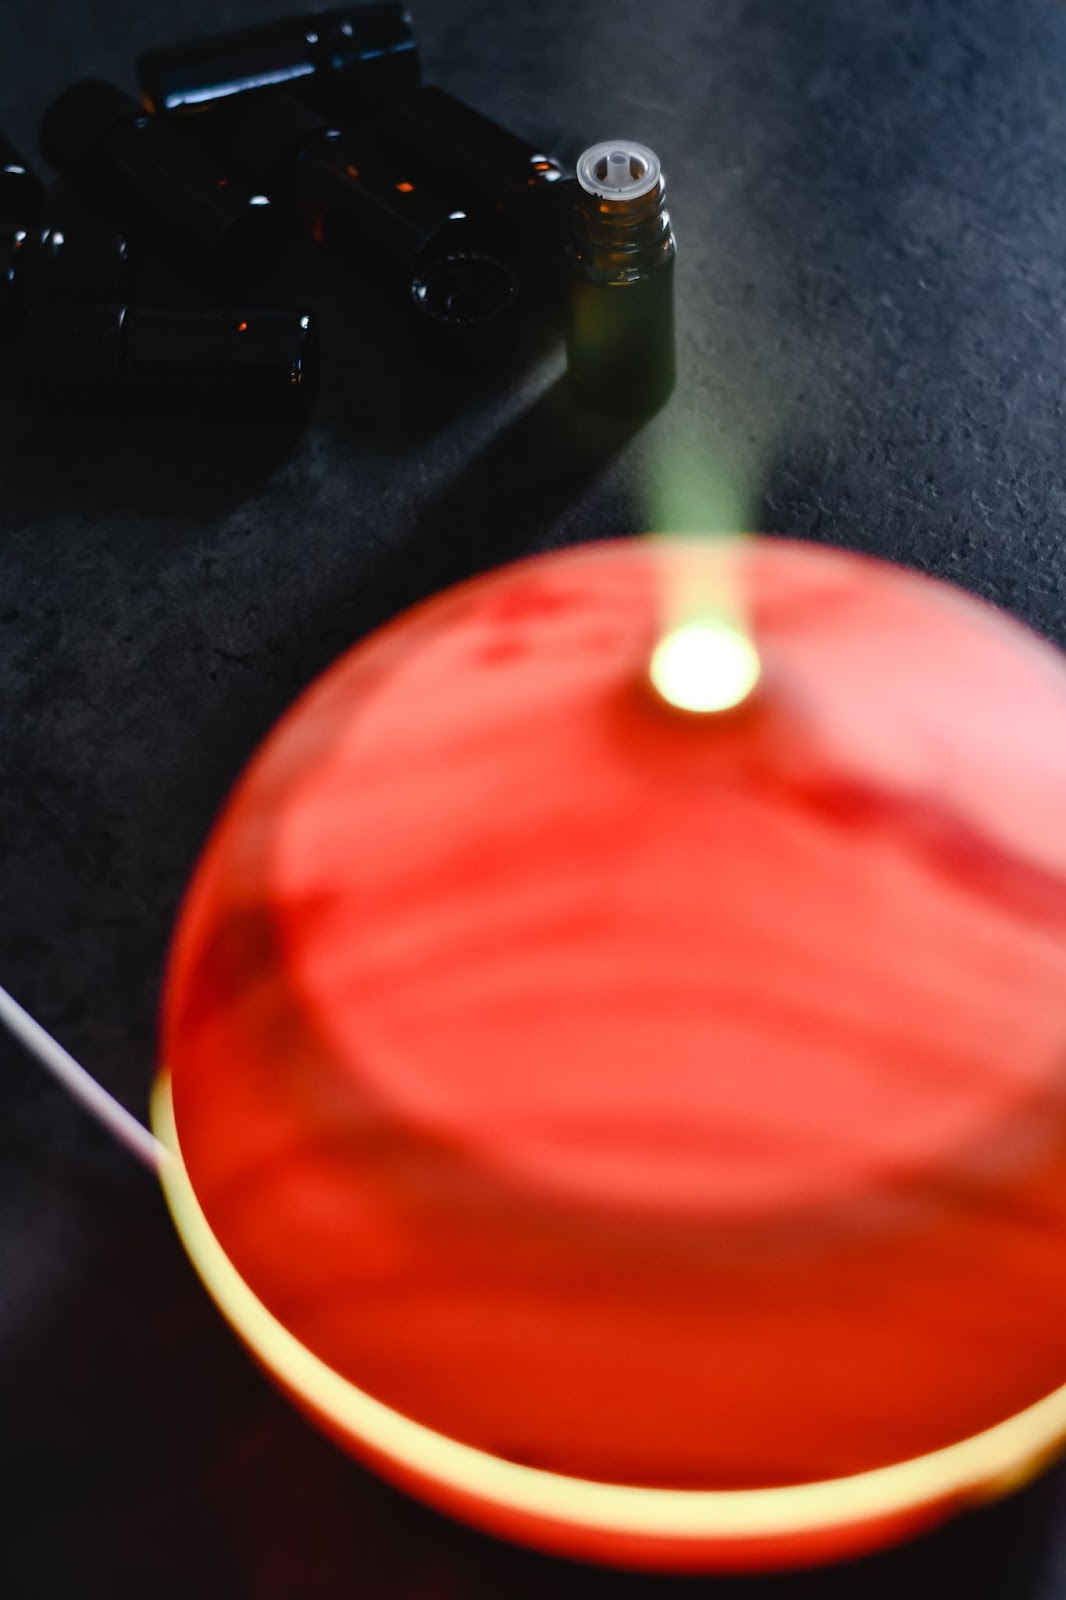 Close up shot of a red essential oil diffuser on black surface.